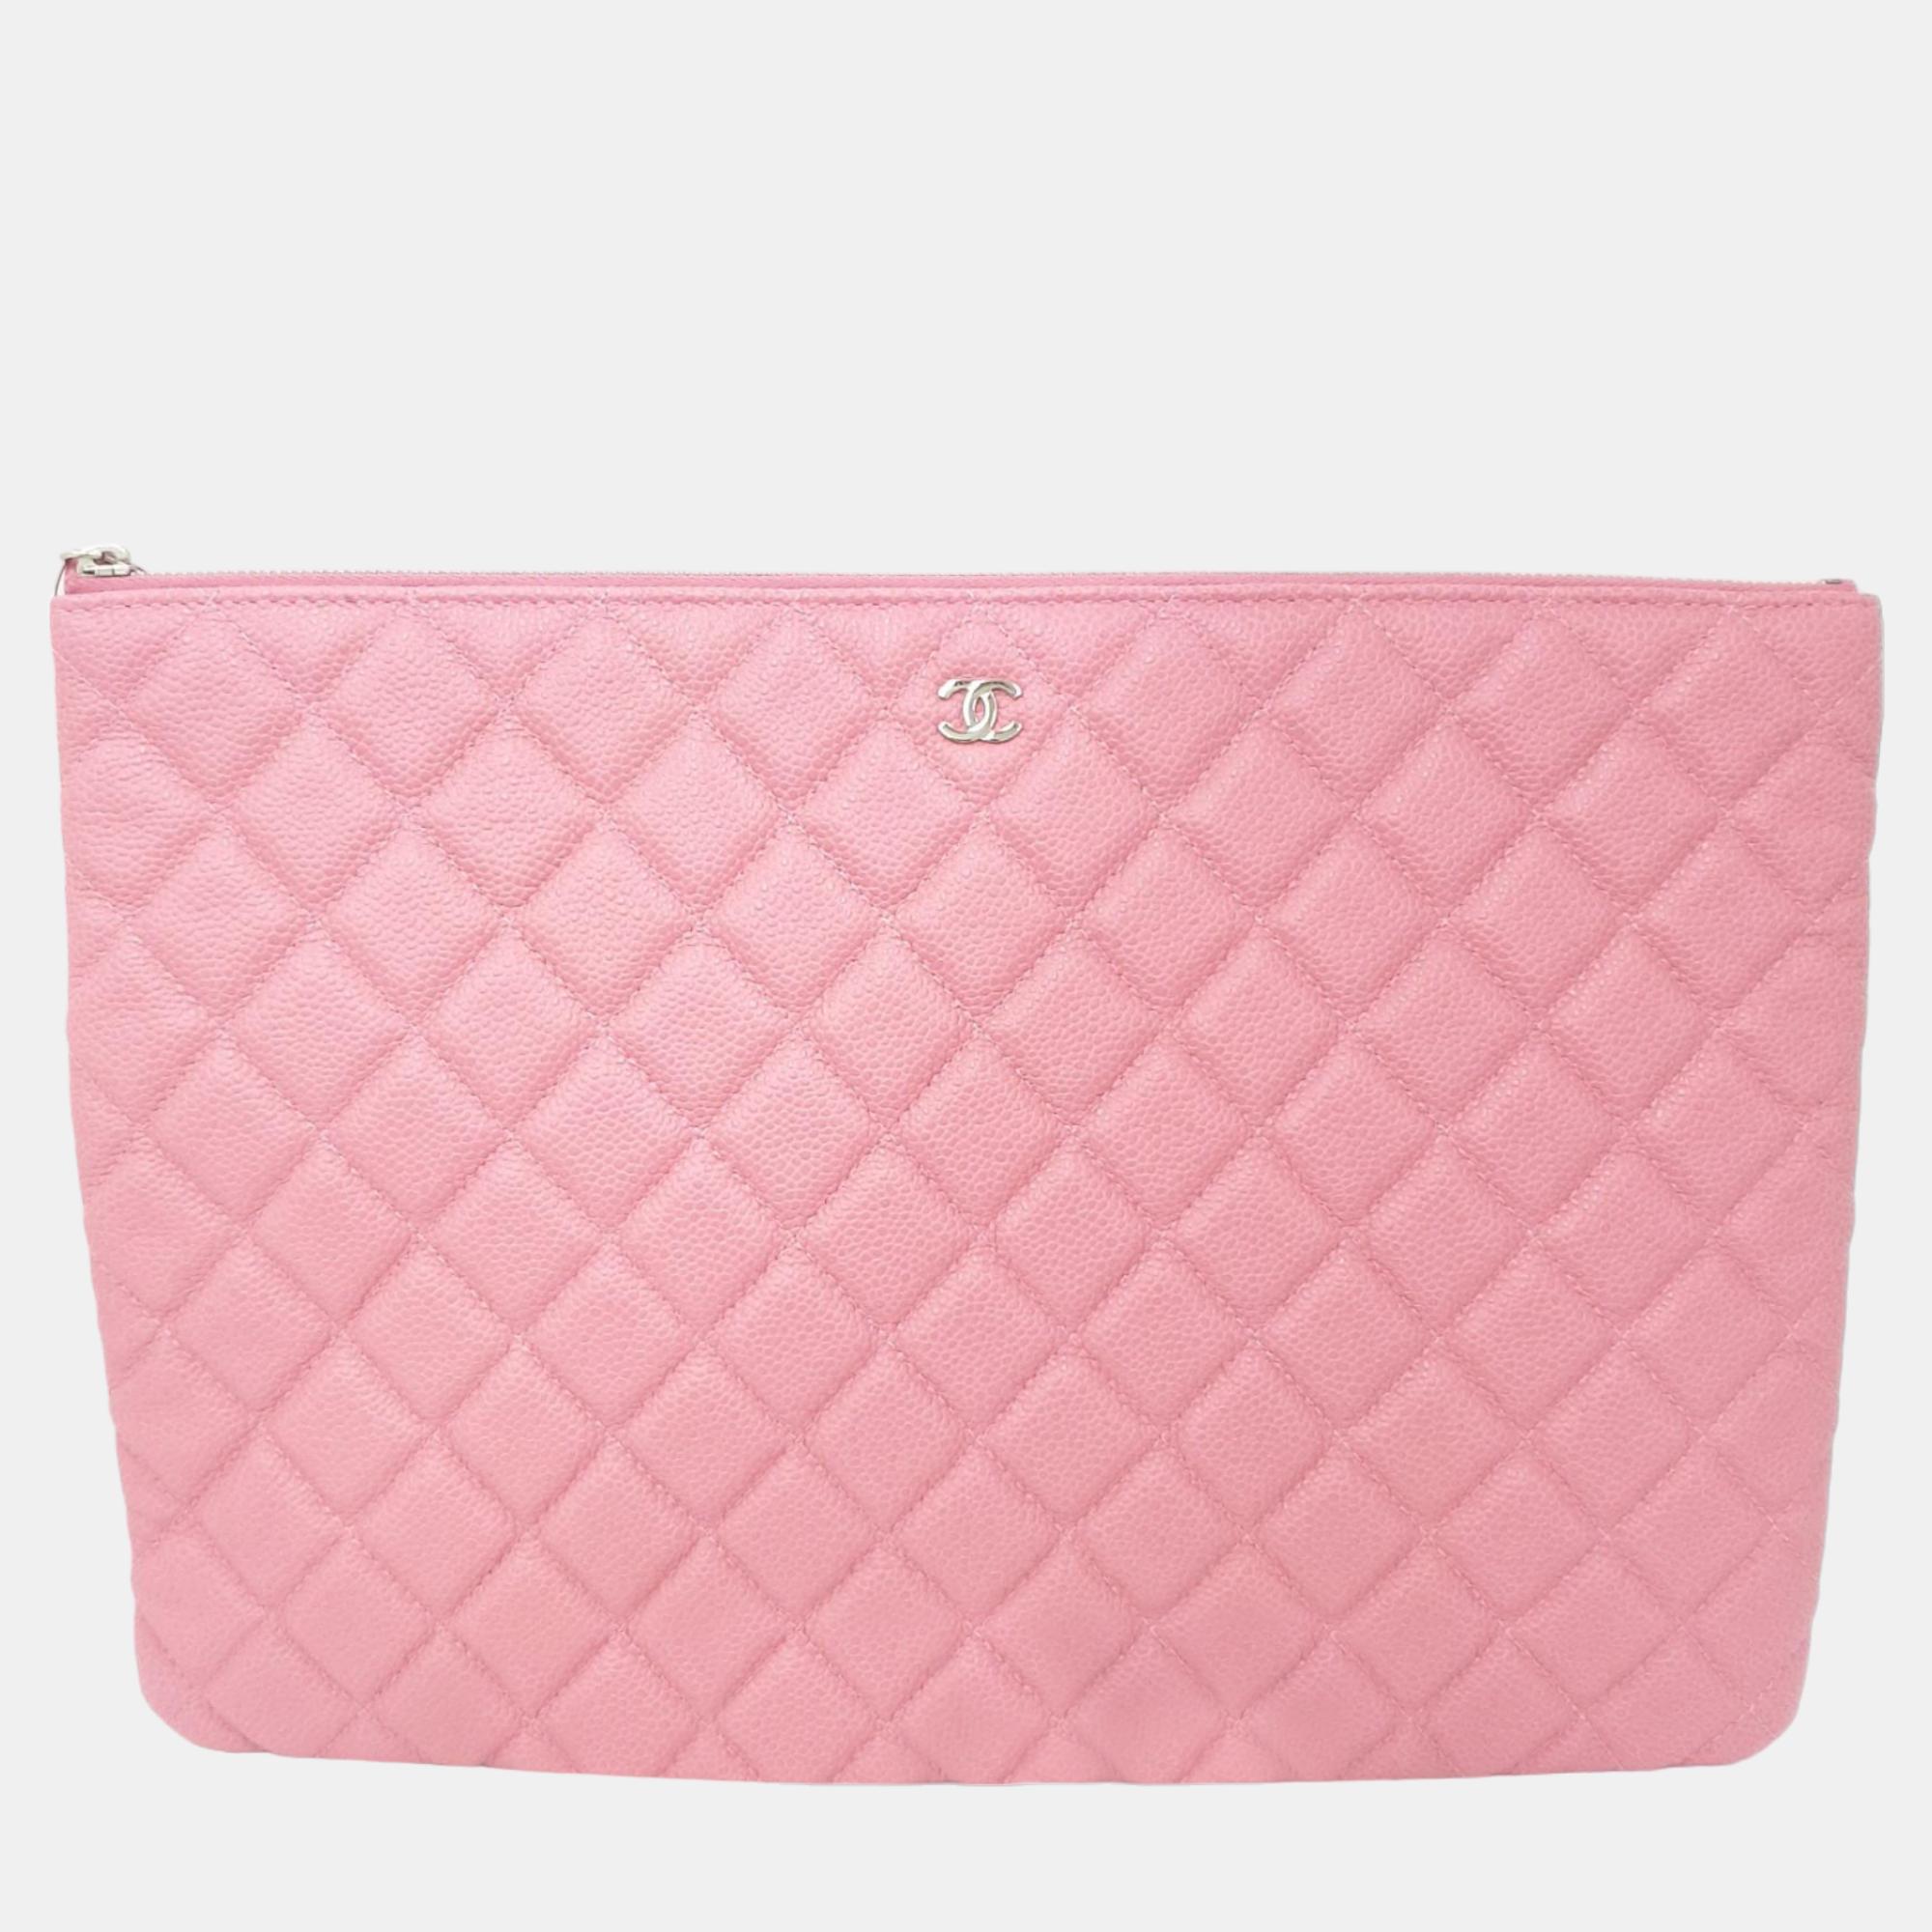 Chanel pink caviar large clutch